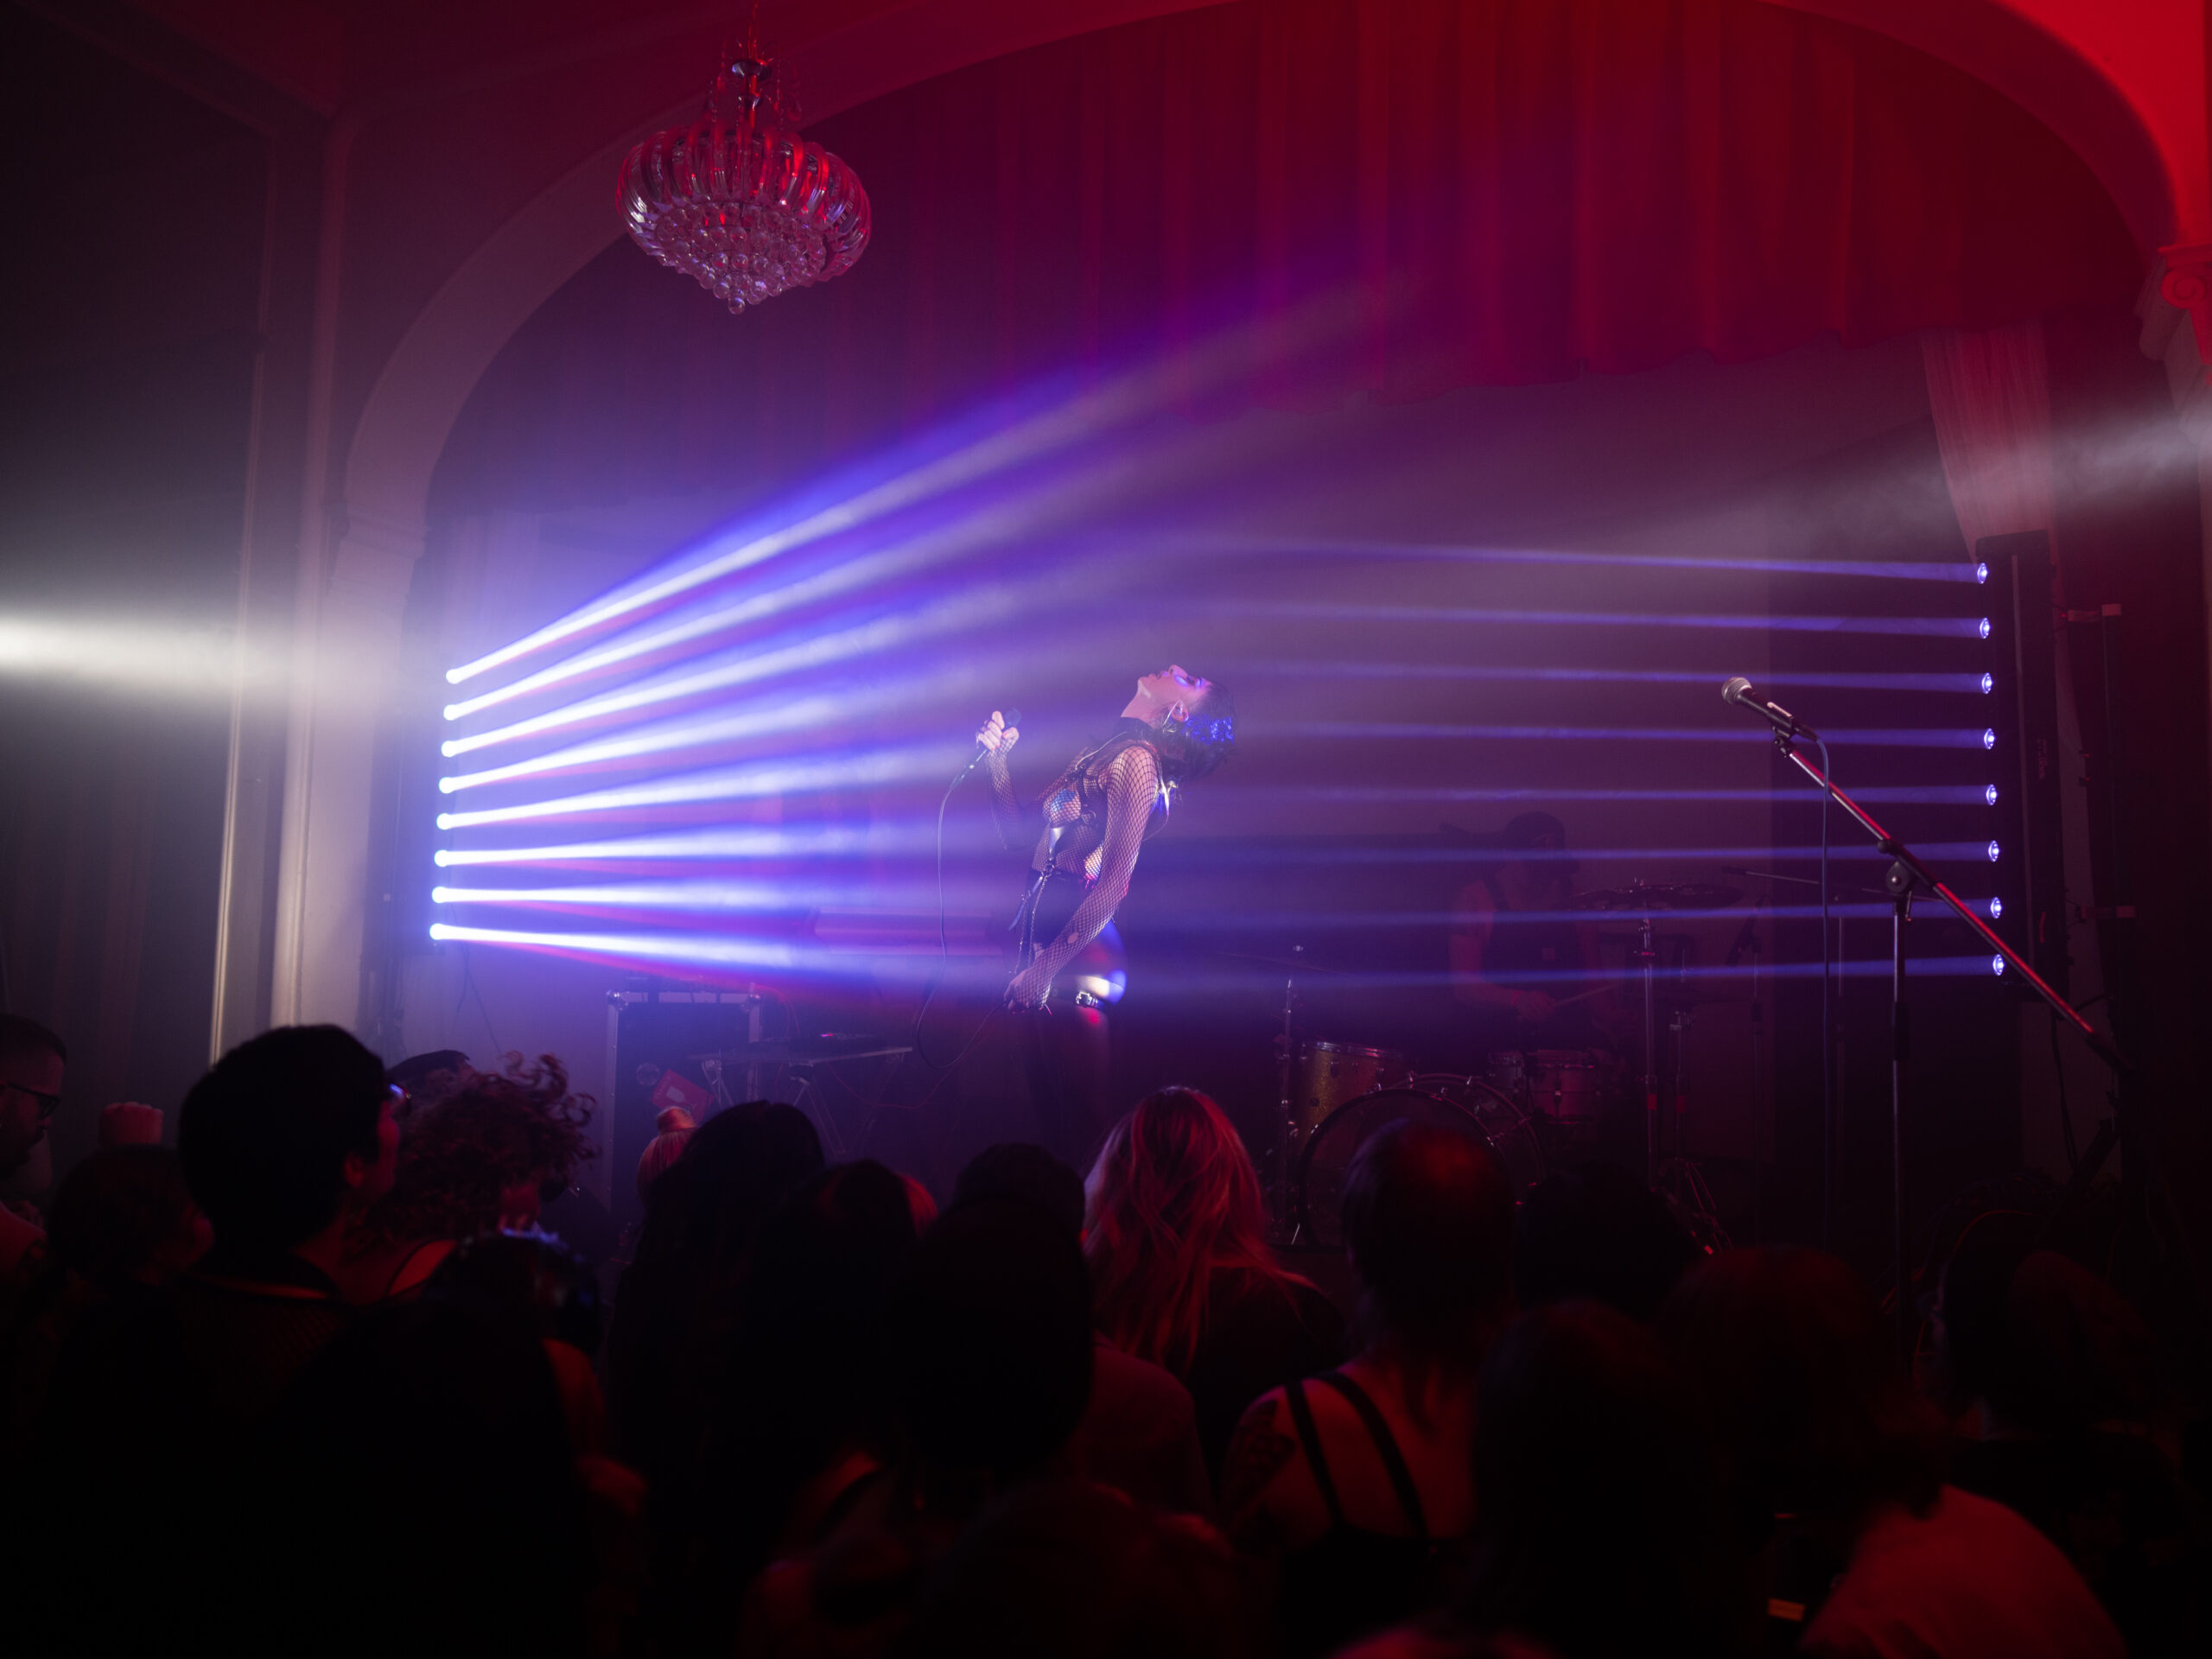 Performer holds microphone and faces beams of purple light.